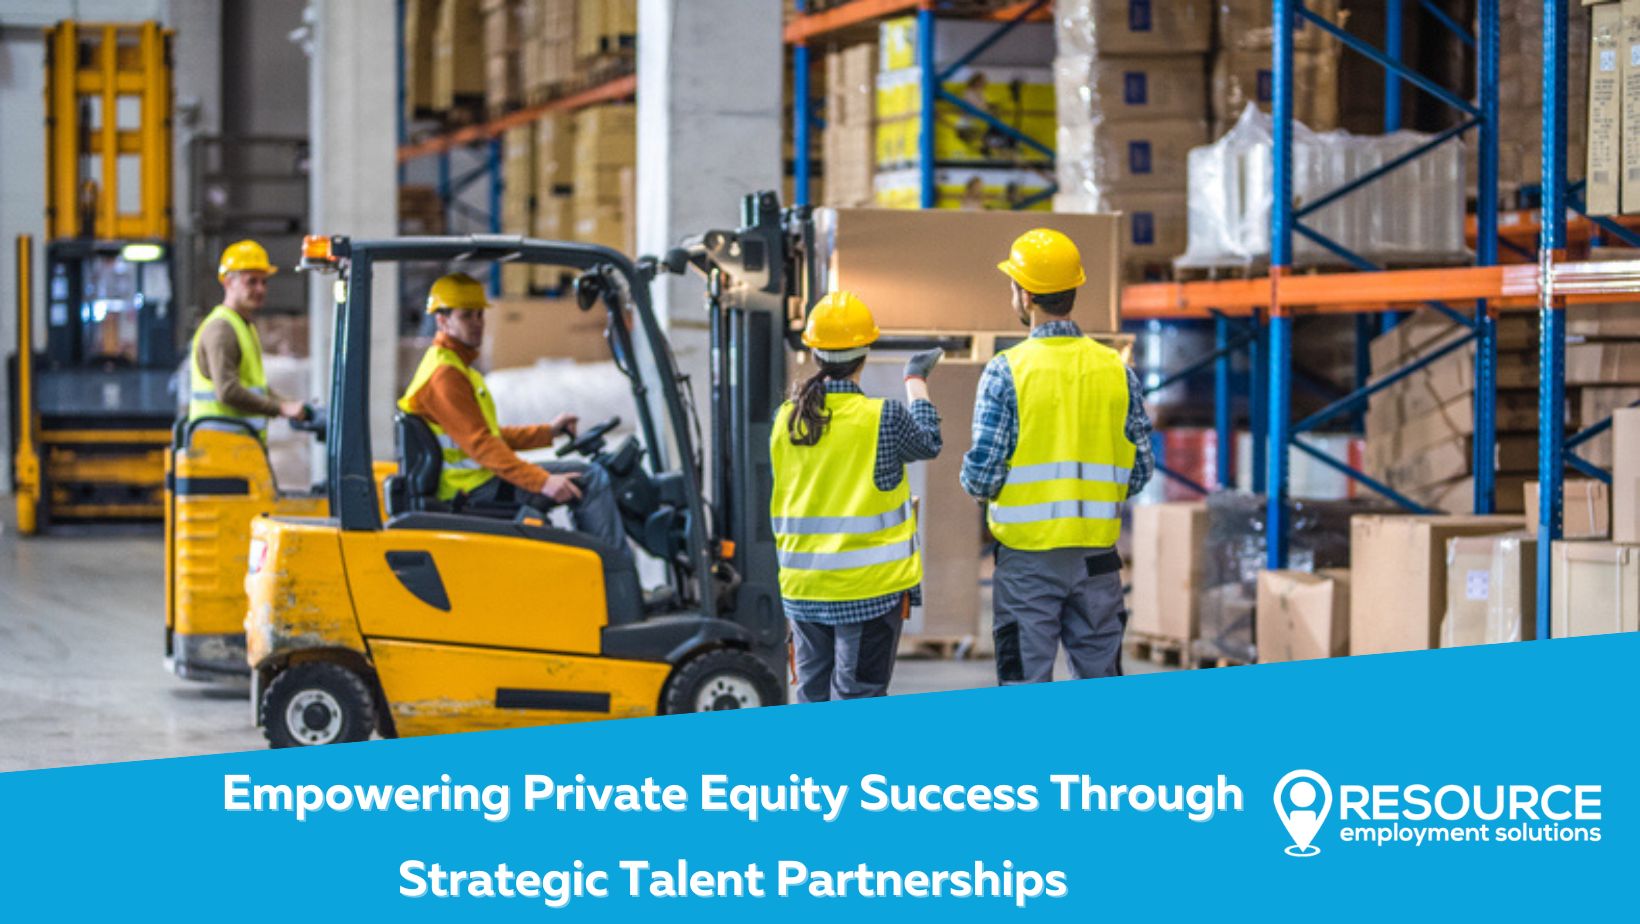 Empowering Private Equity Success Through Strategic Talent Partnerships